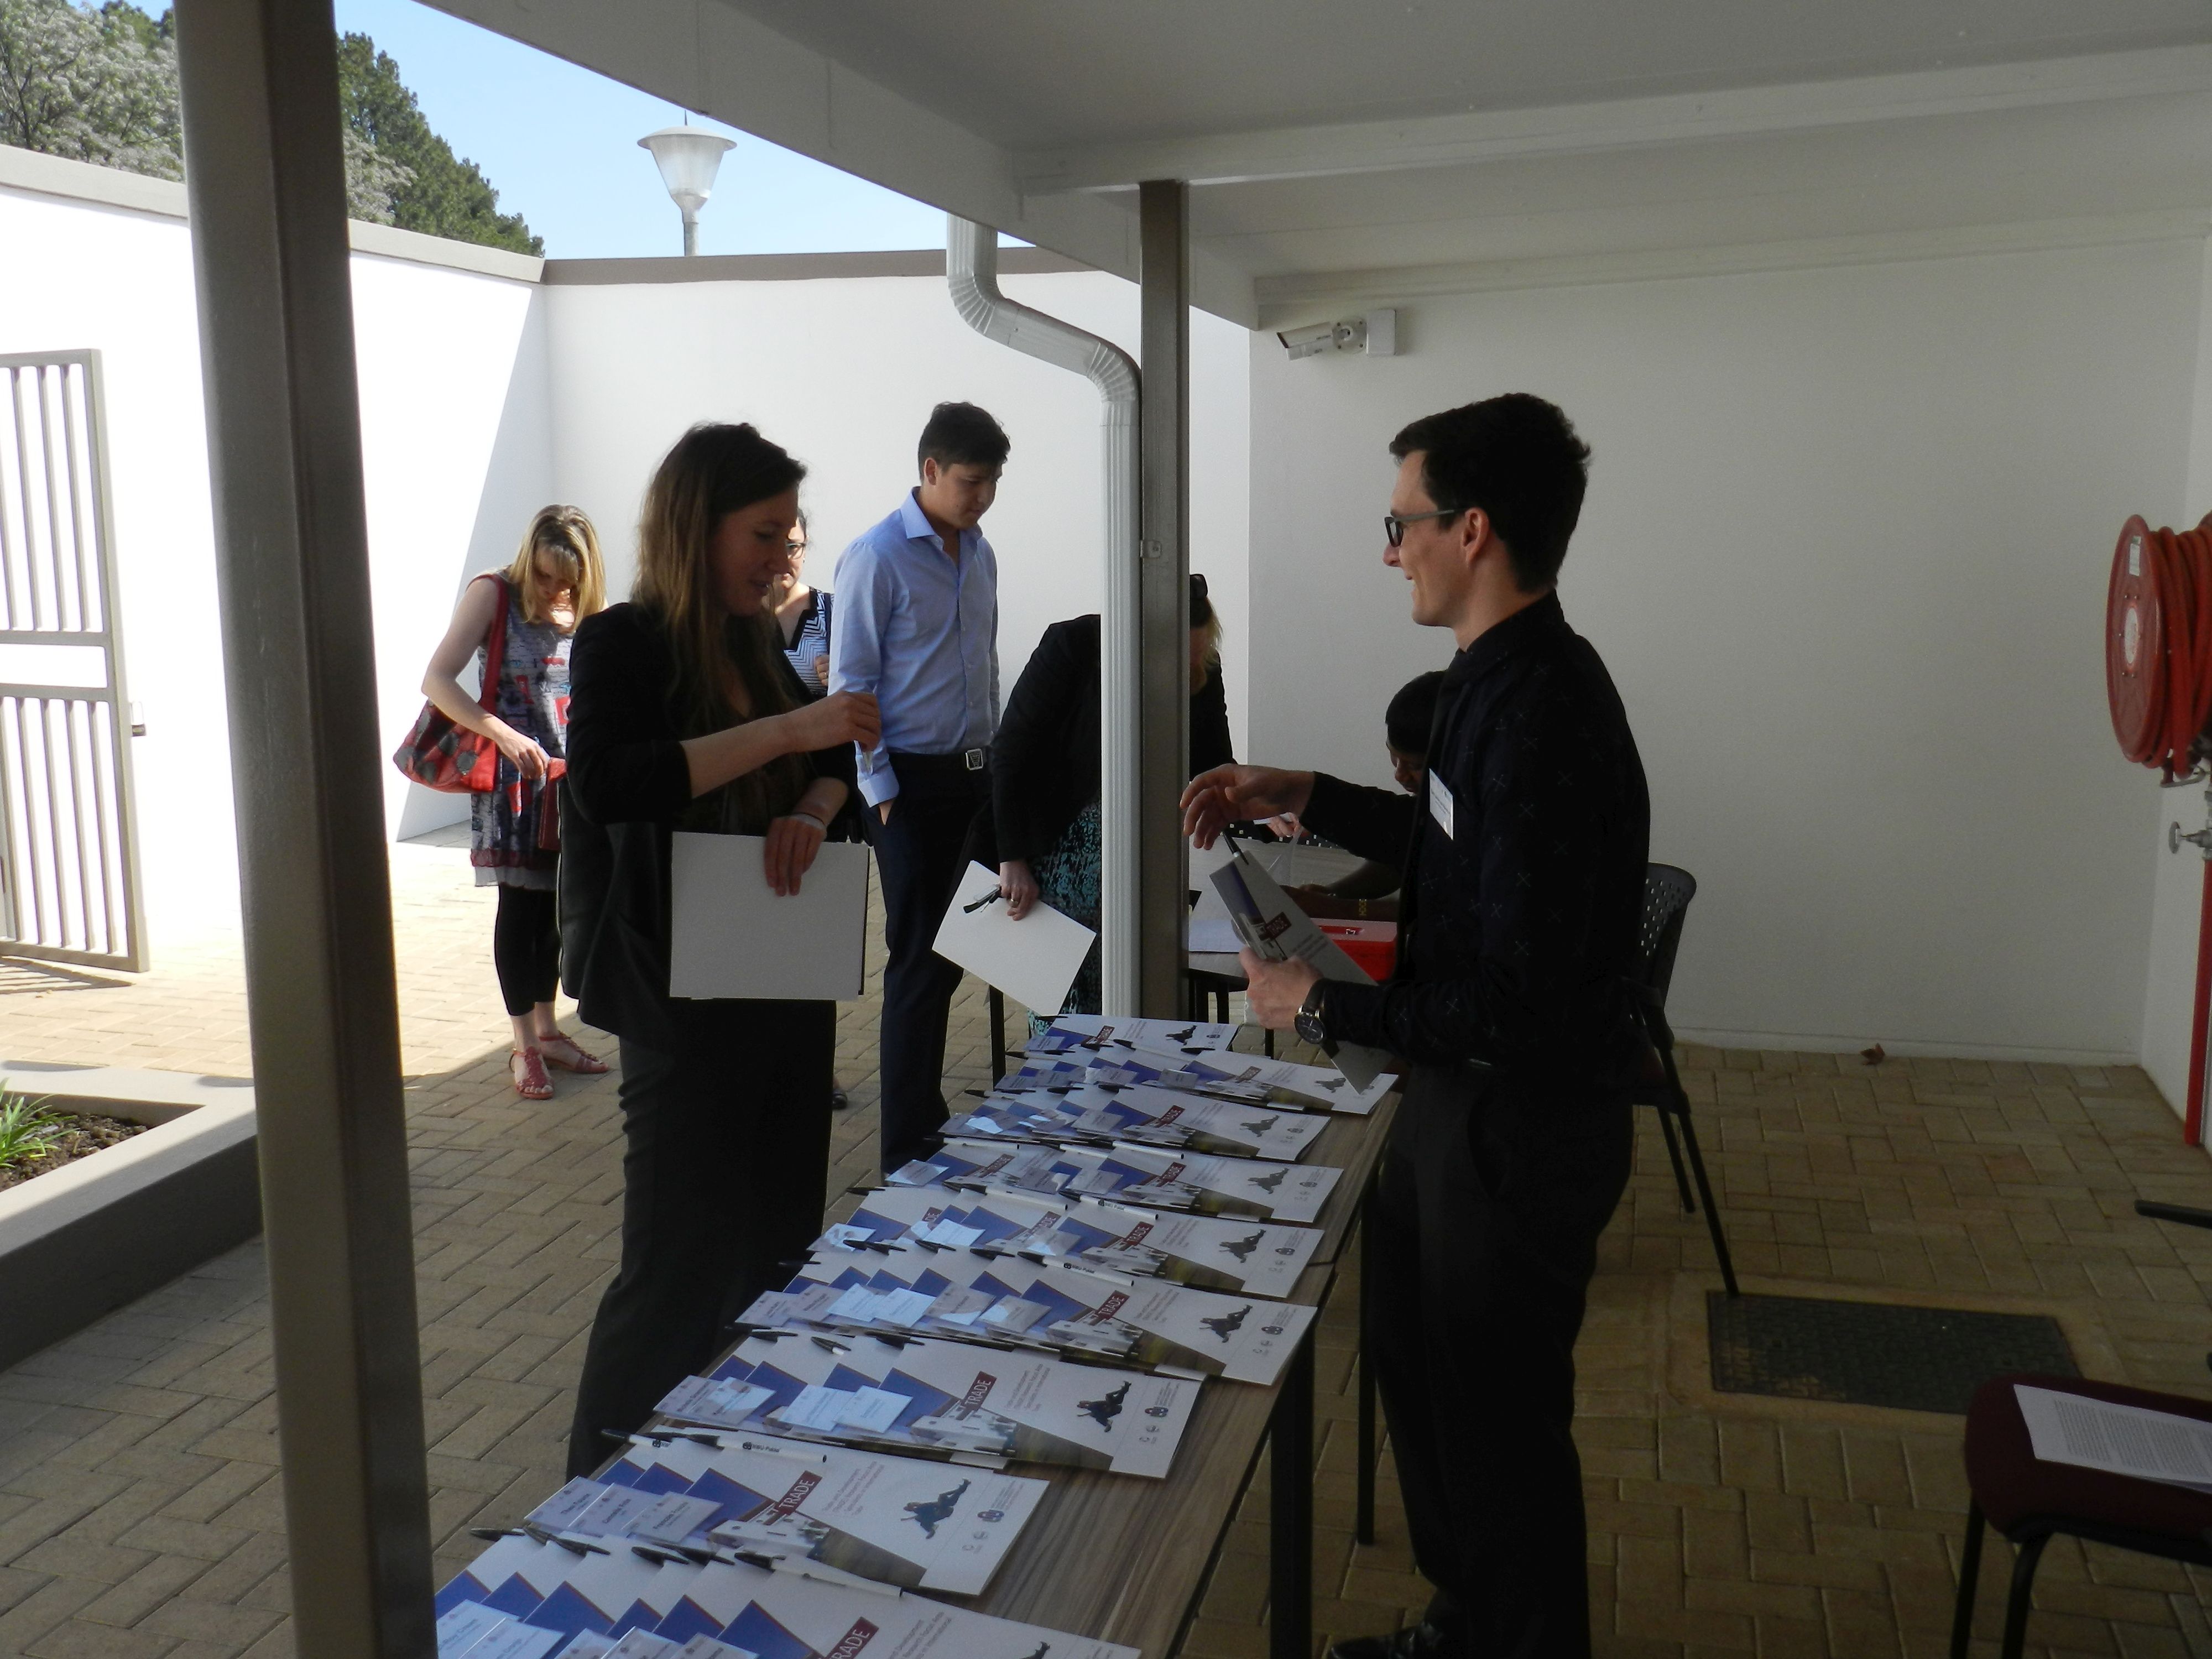 Guests begin to arrive and register/receive their information packages